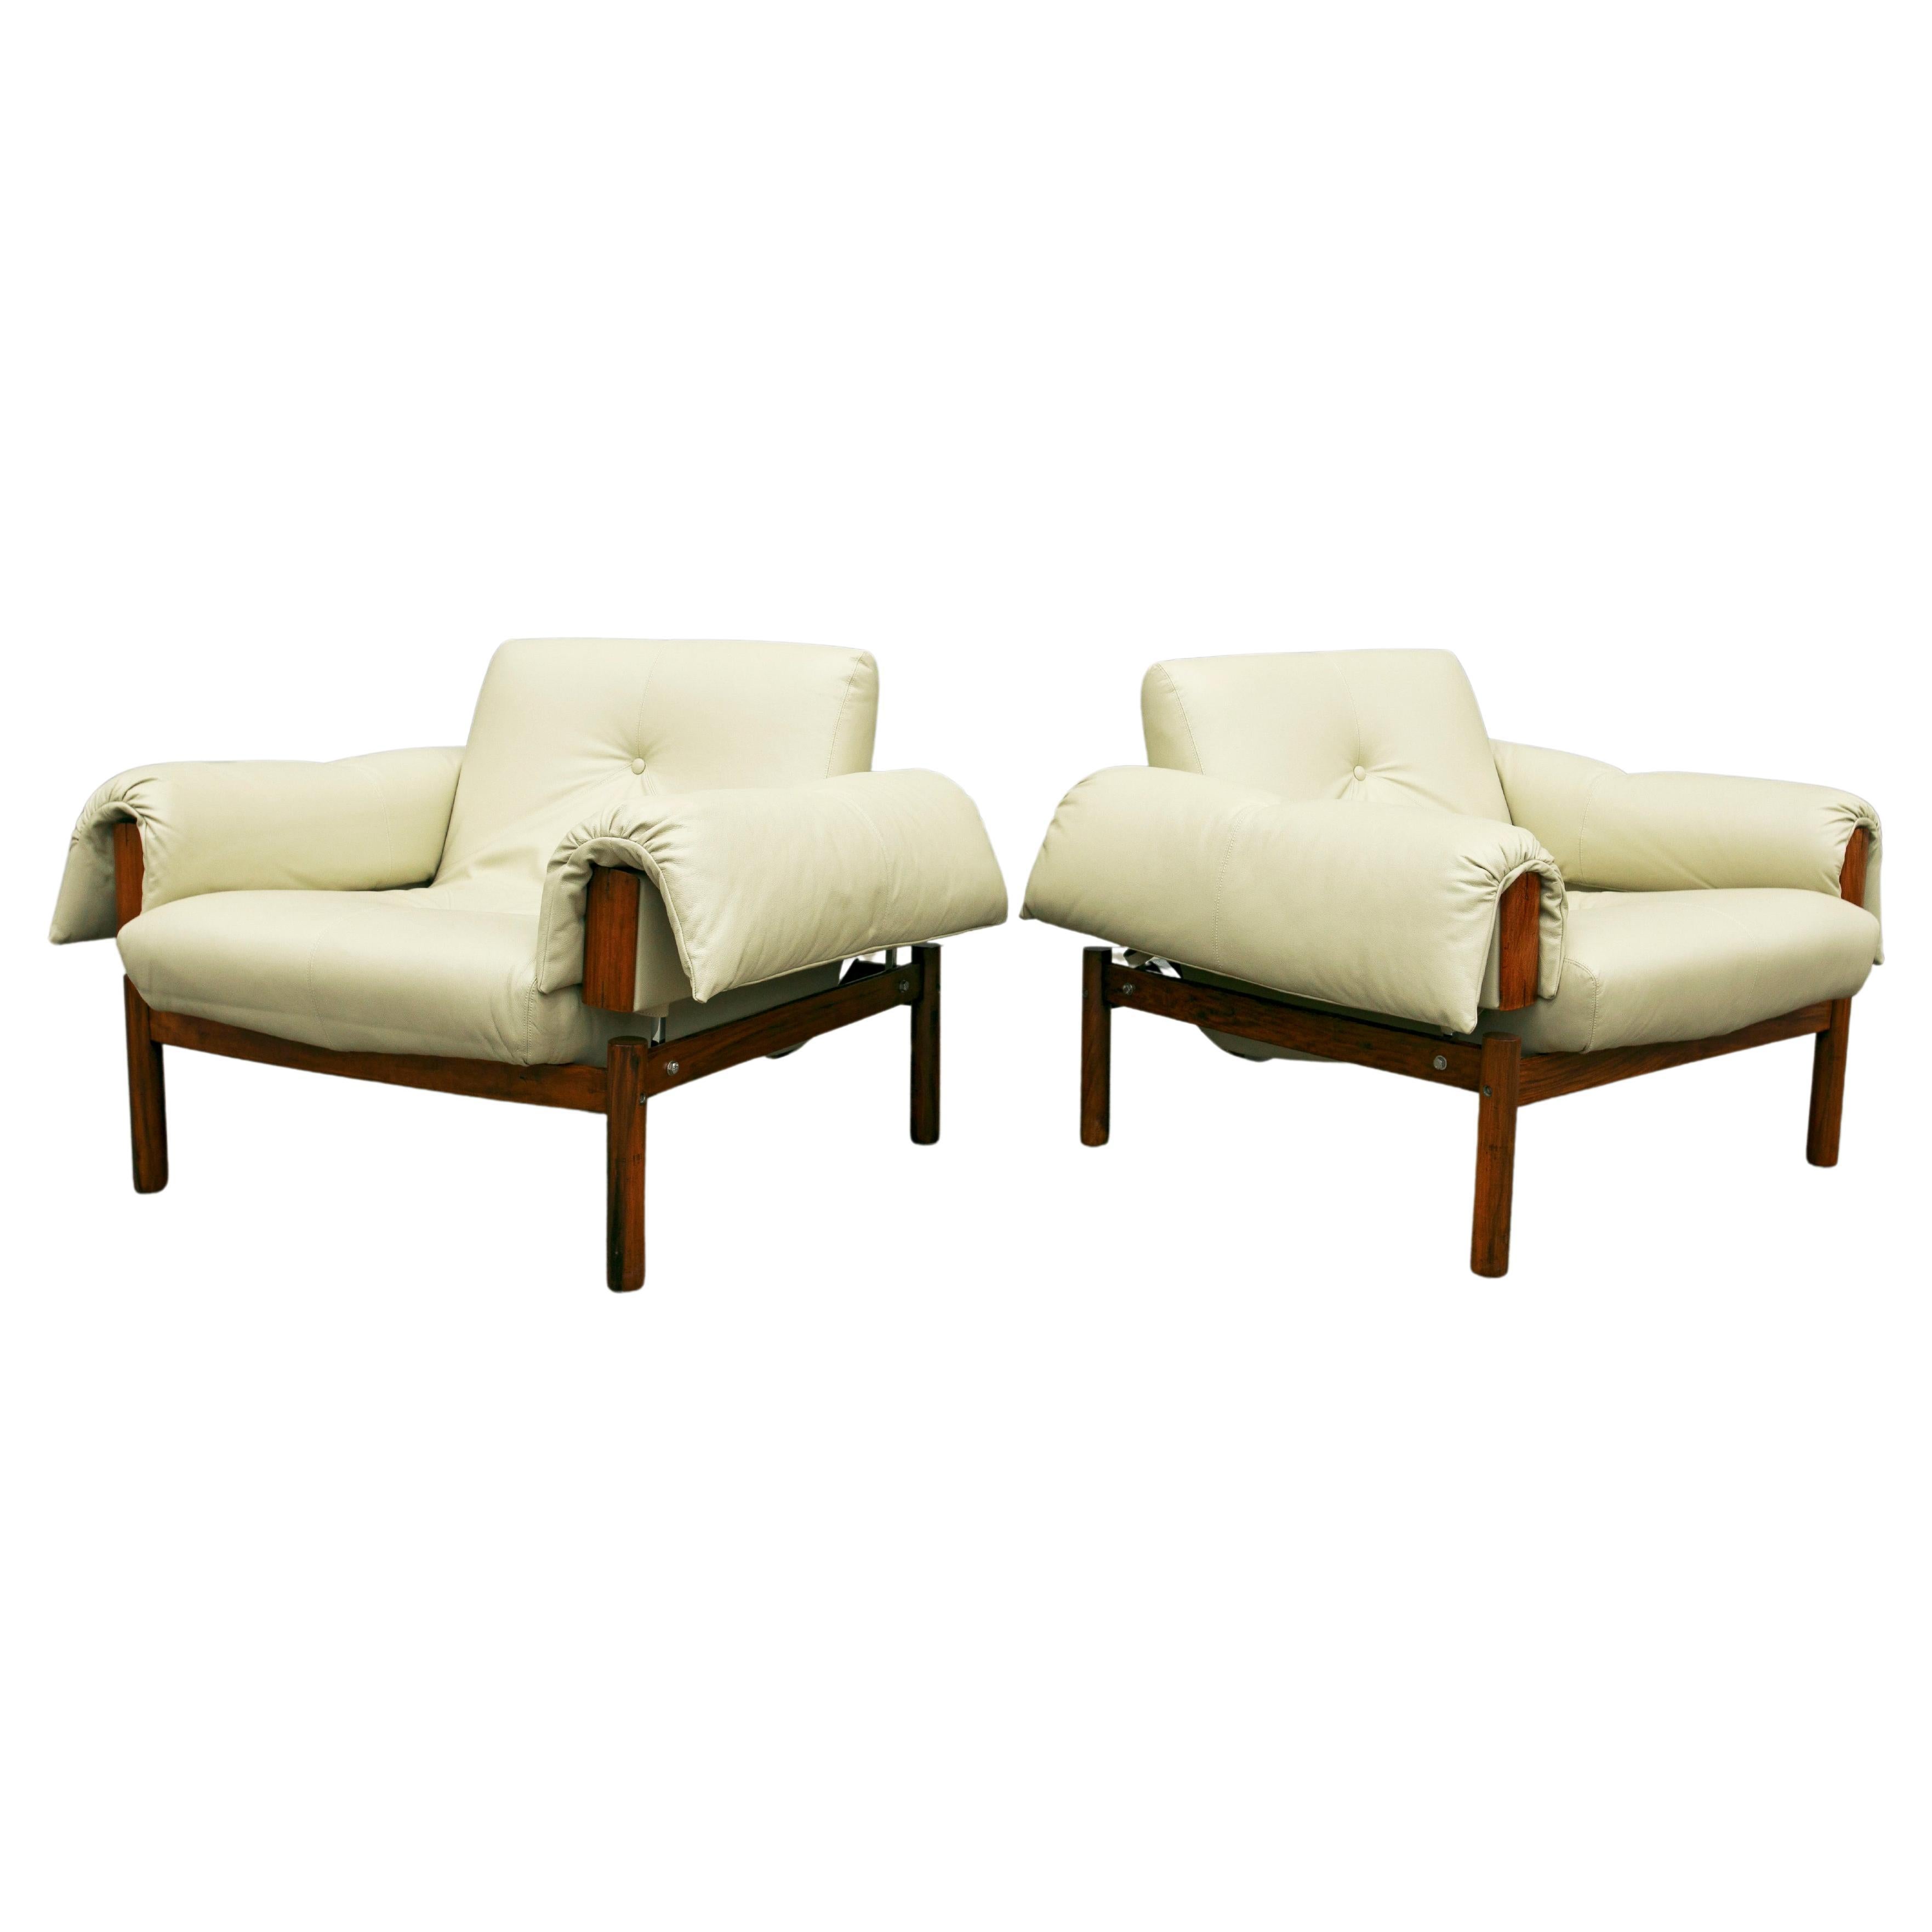 Midcentury Armchairs MP-13 by Percival Lafer in Hardwood & Beige Leather, Brazil